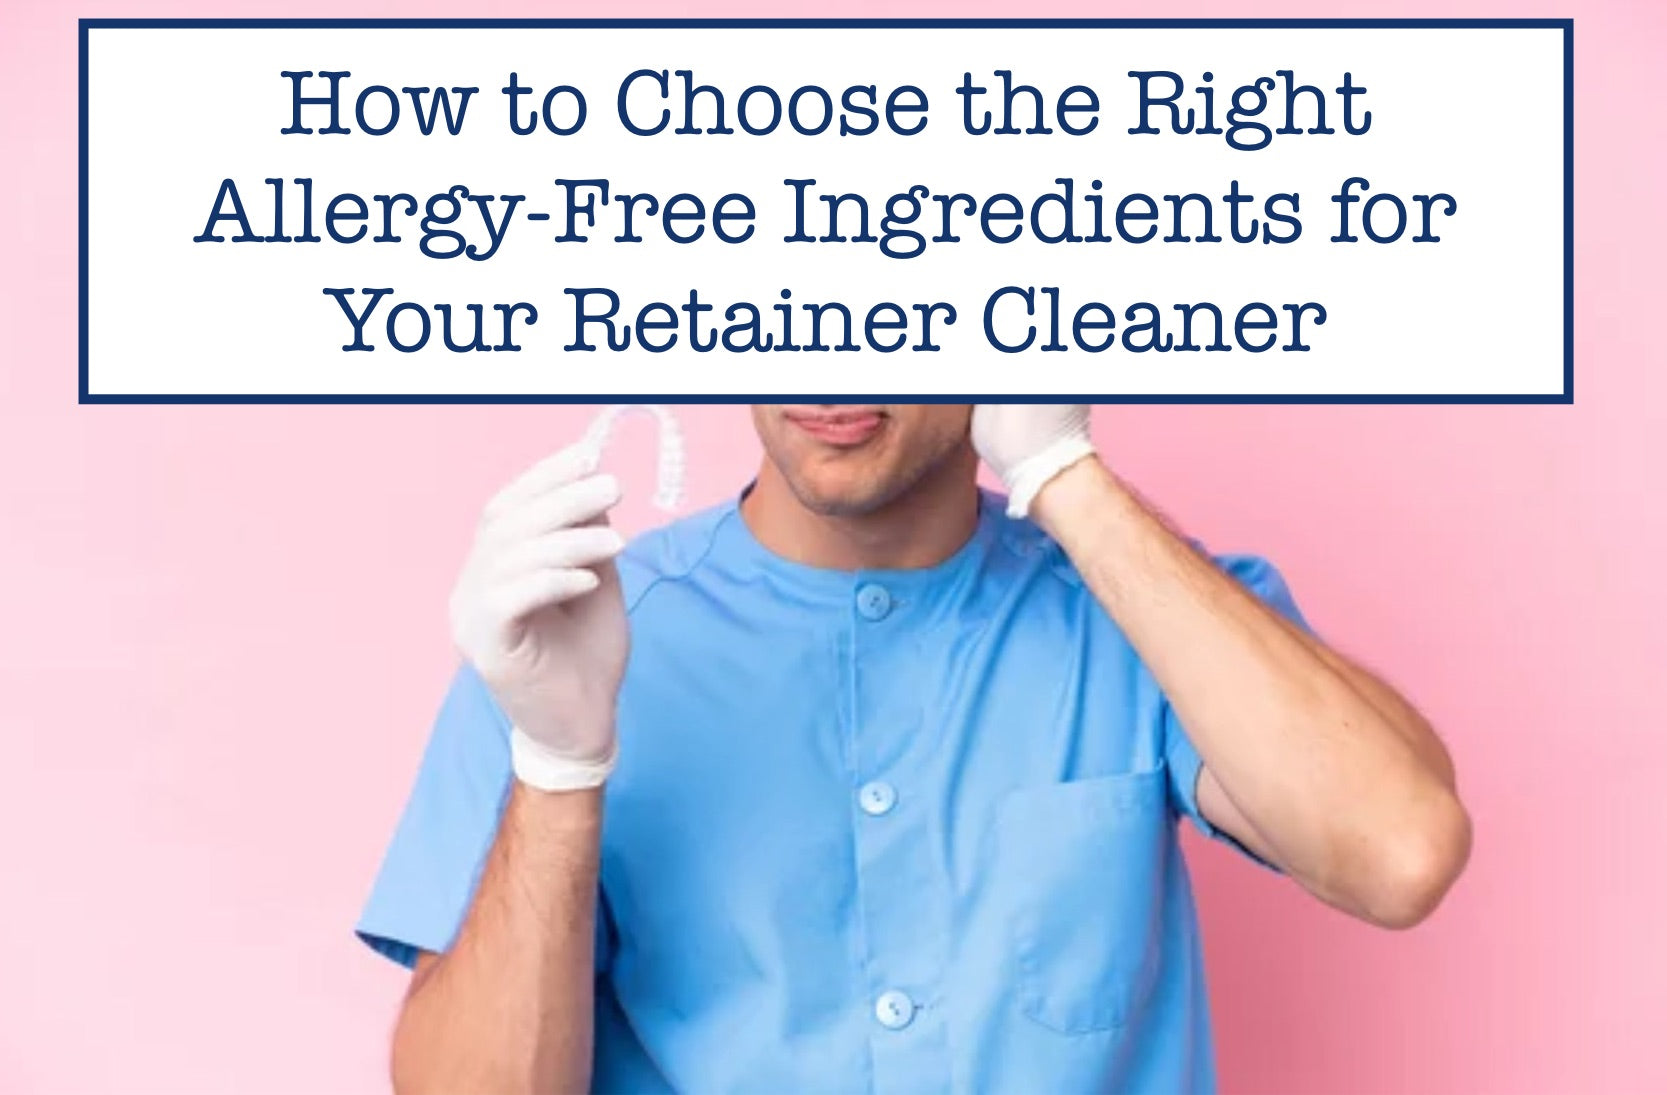 How to Choose the Right Allergy-Free Ingredients for Your Retainer Cleaner